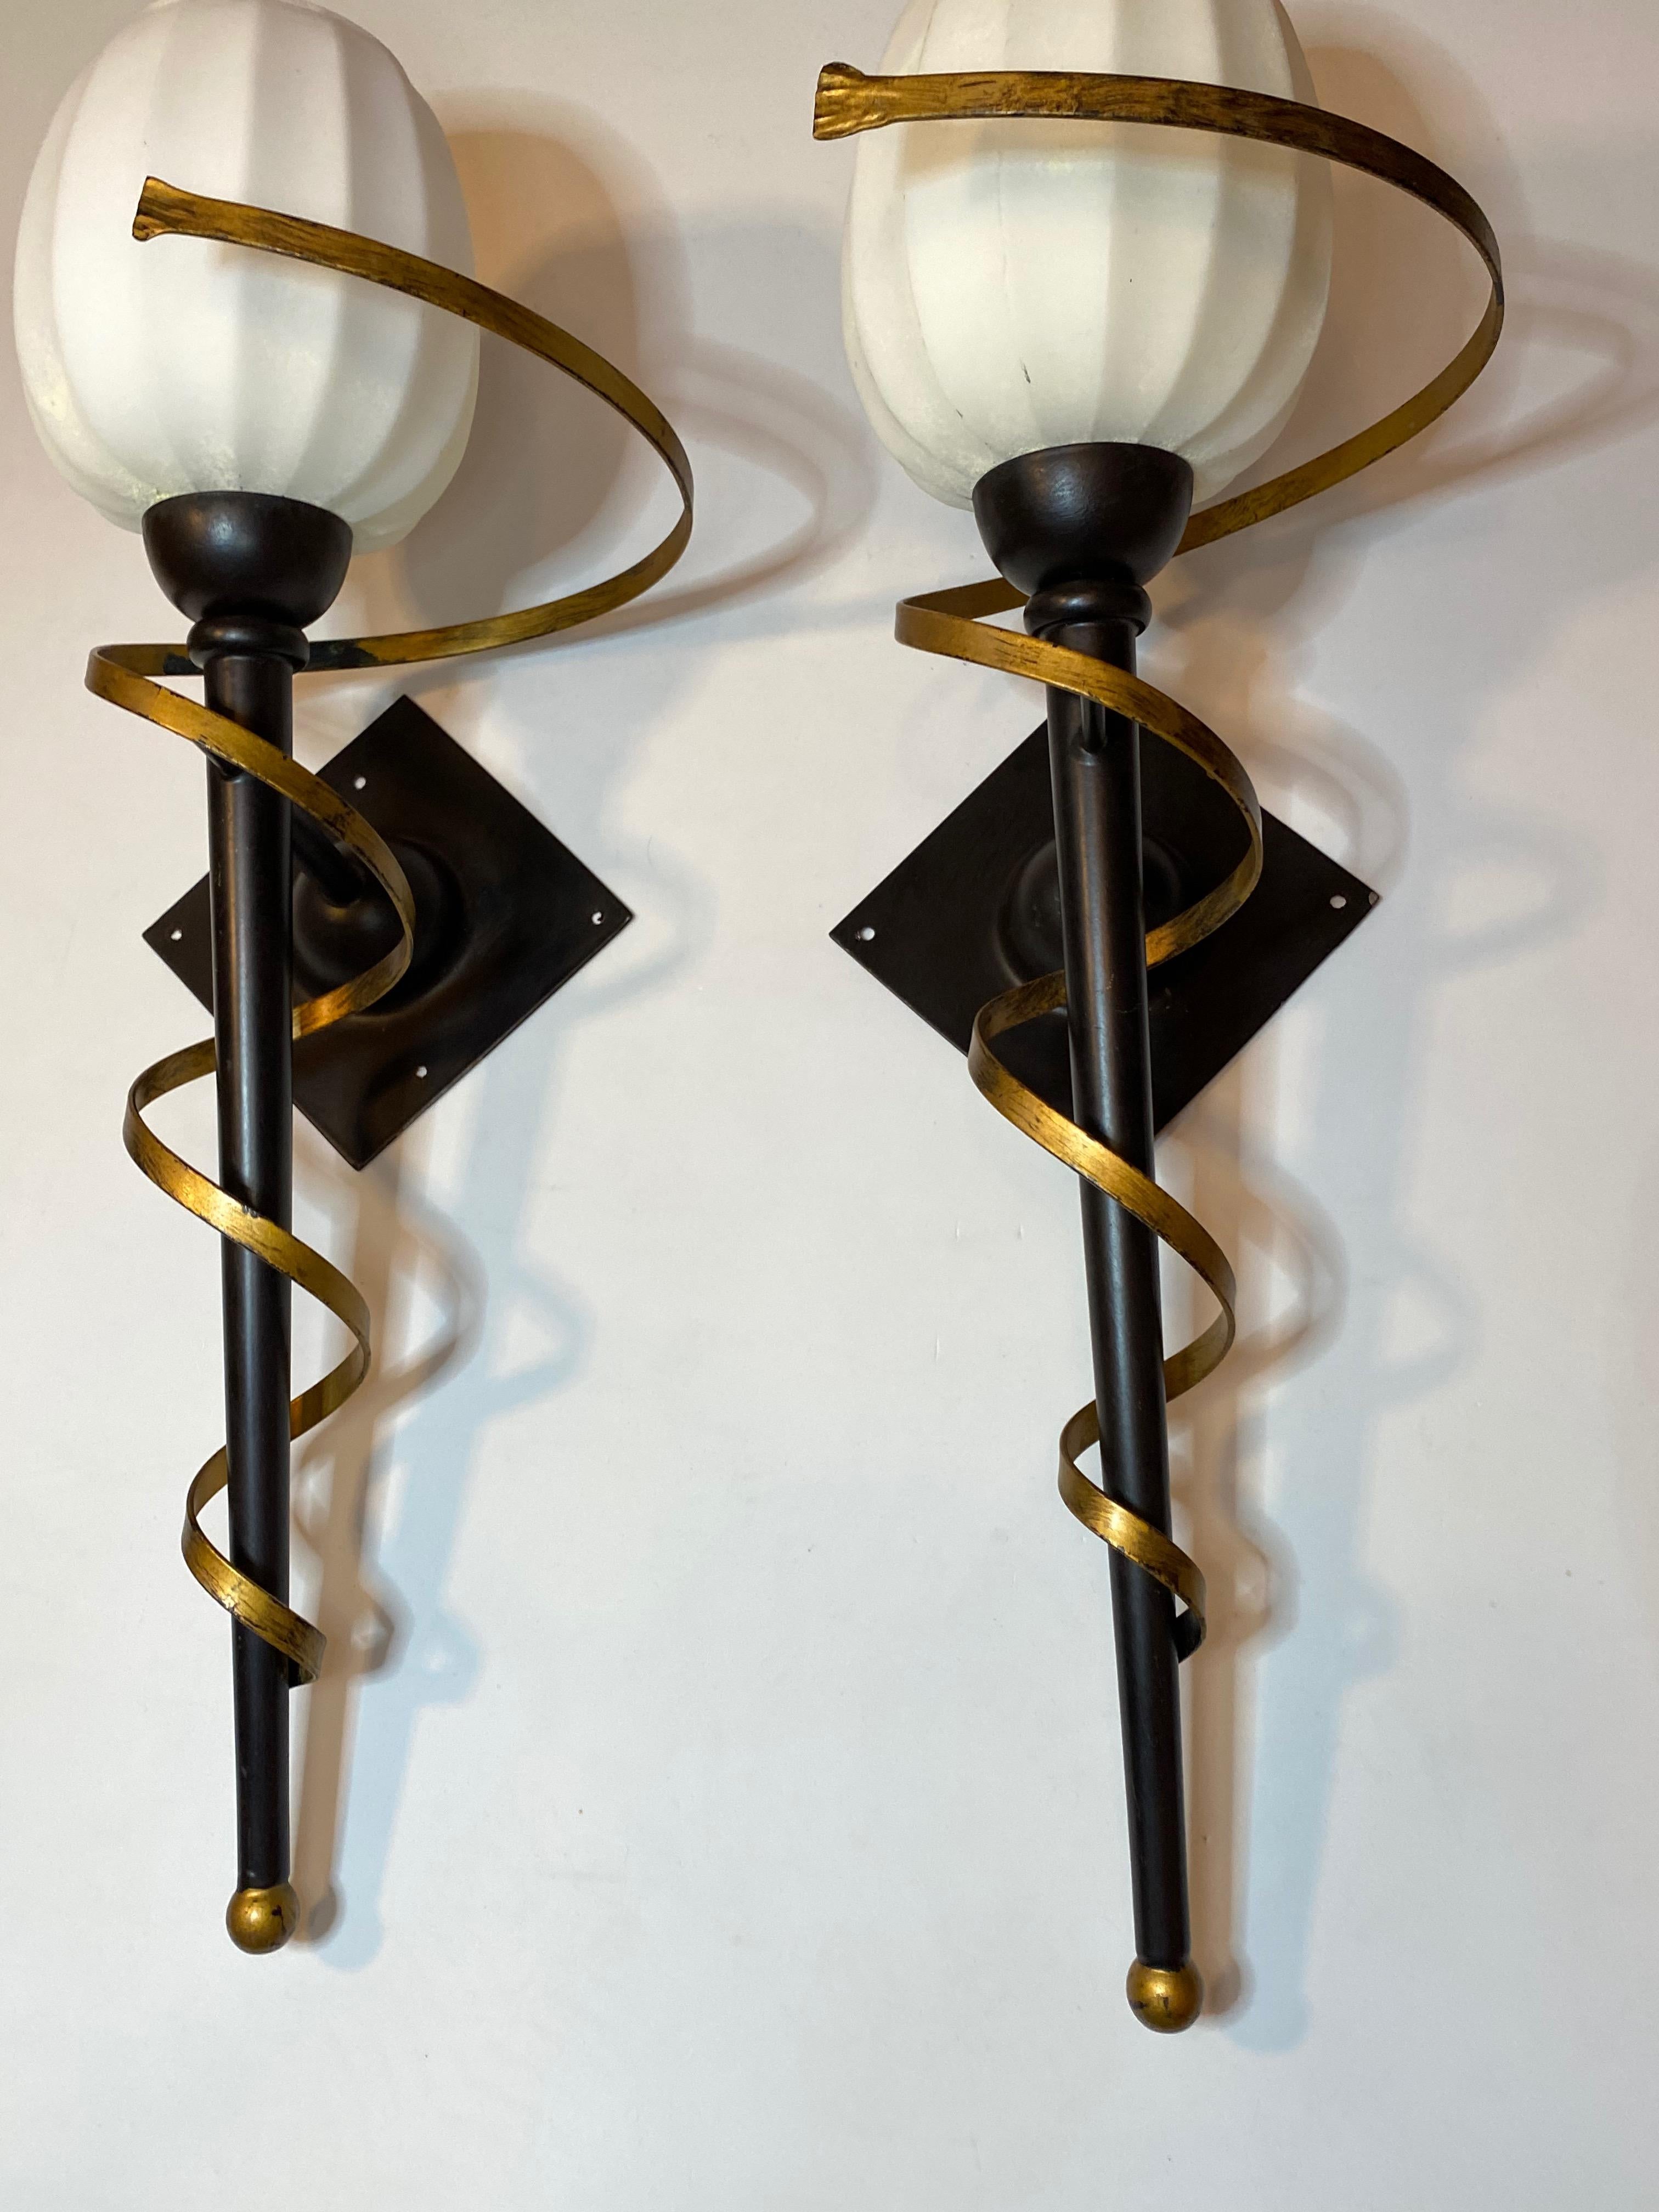 Pair of Torch Tole Sconces Gilded and Black Metal, Koegl Leuchten, 1980s For Sale 1